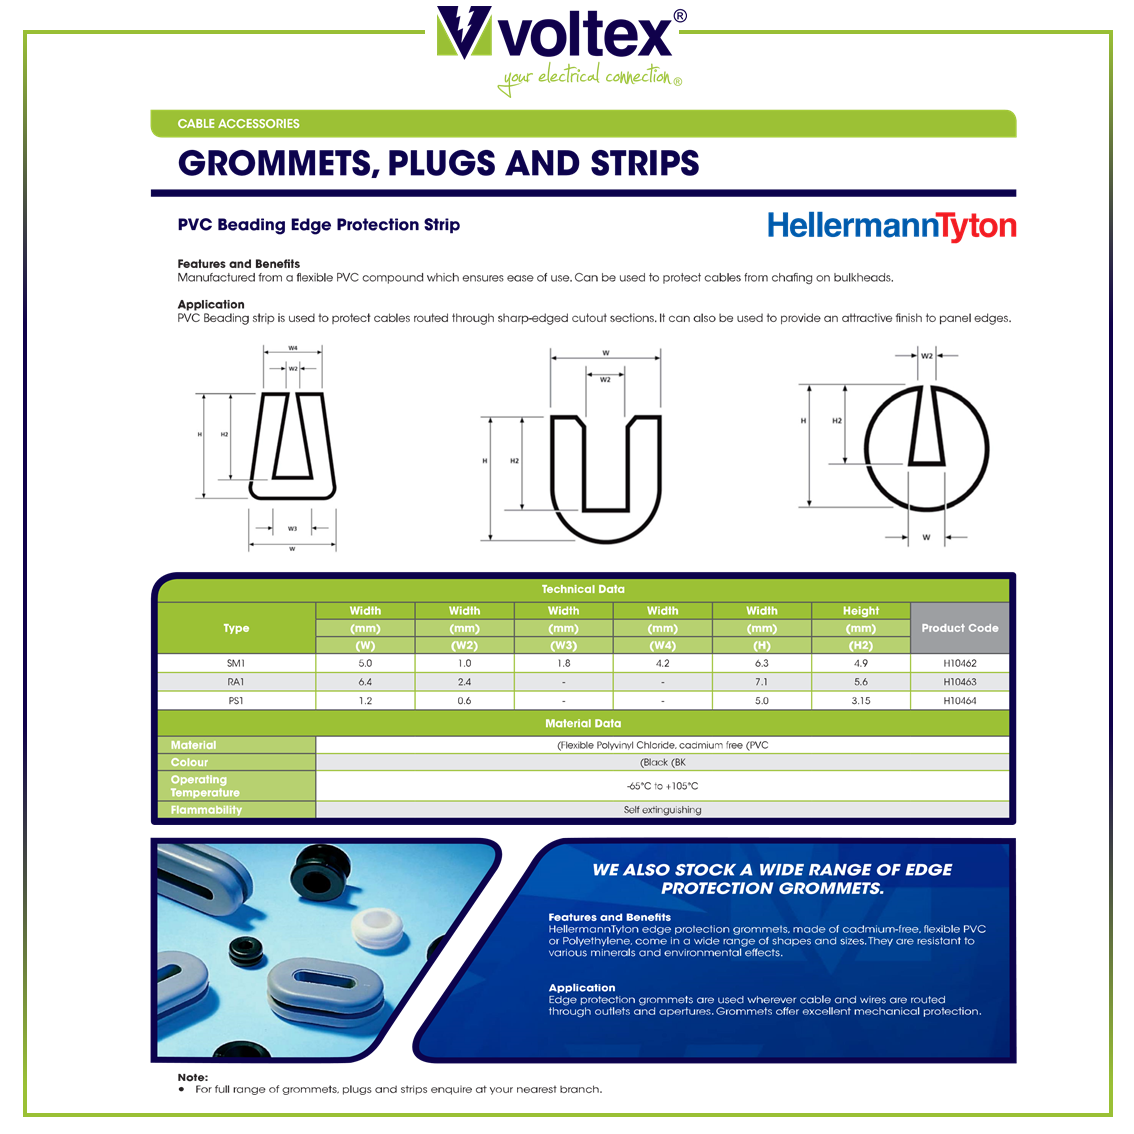 VOLTEX - Grommets, plugs and strips Catalogue